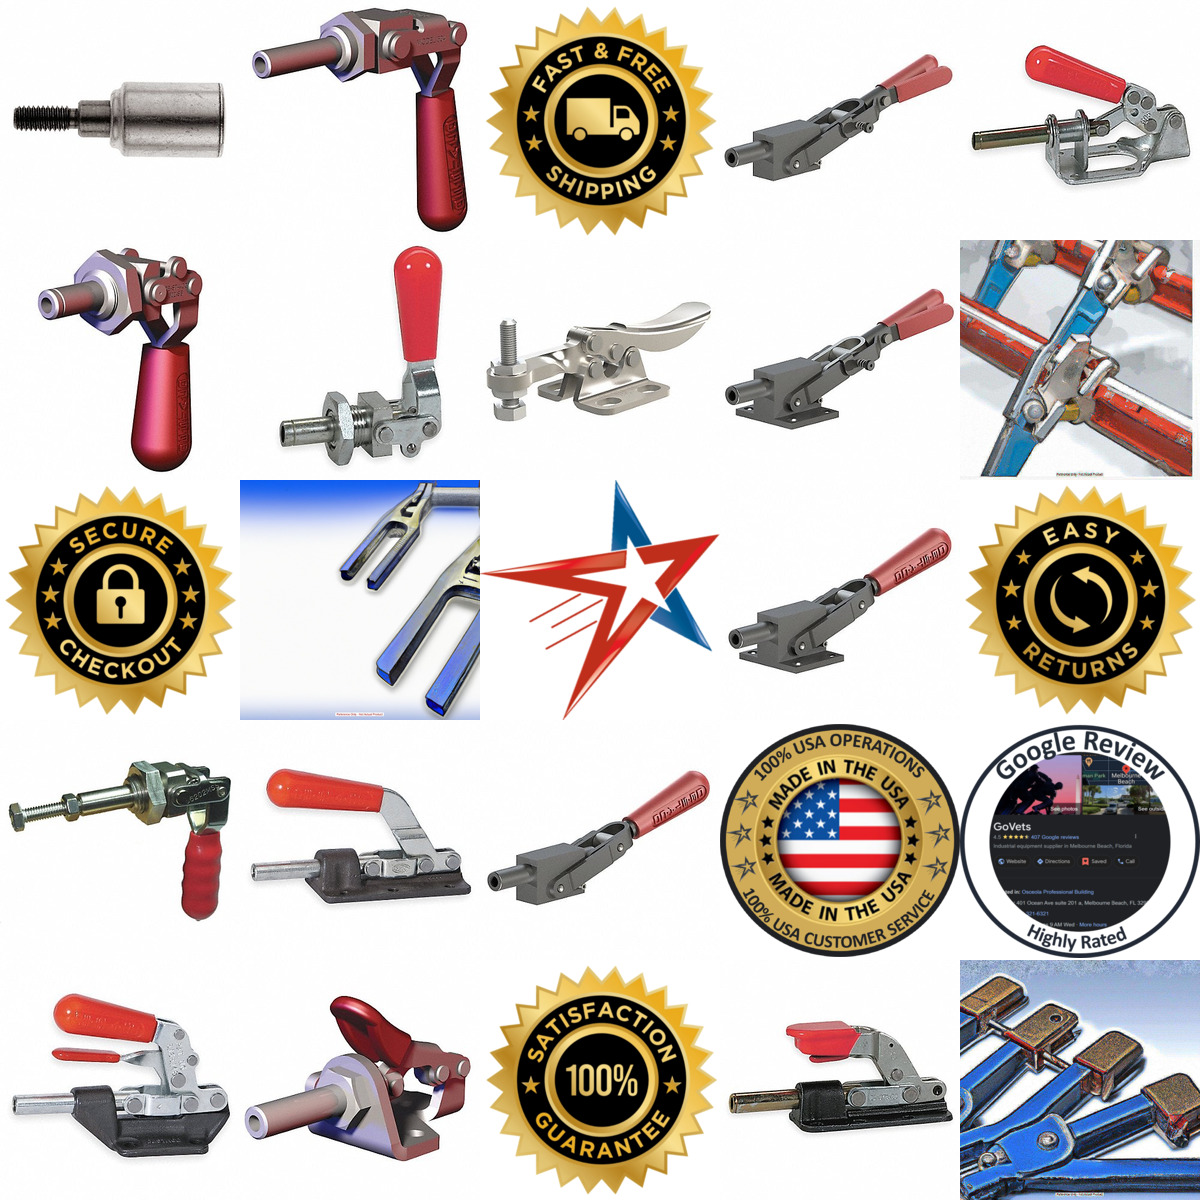 A selection of Straight Line Clamps products on GoVets